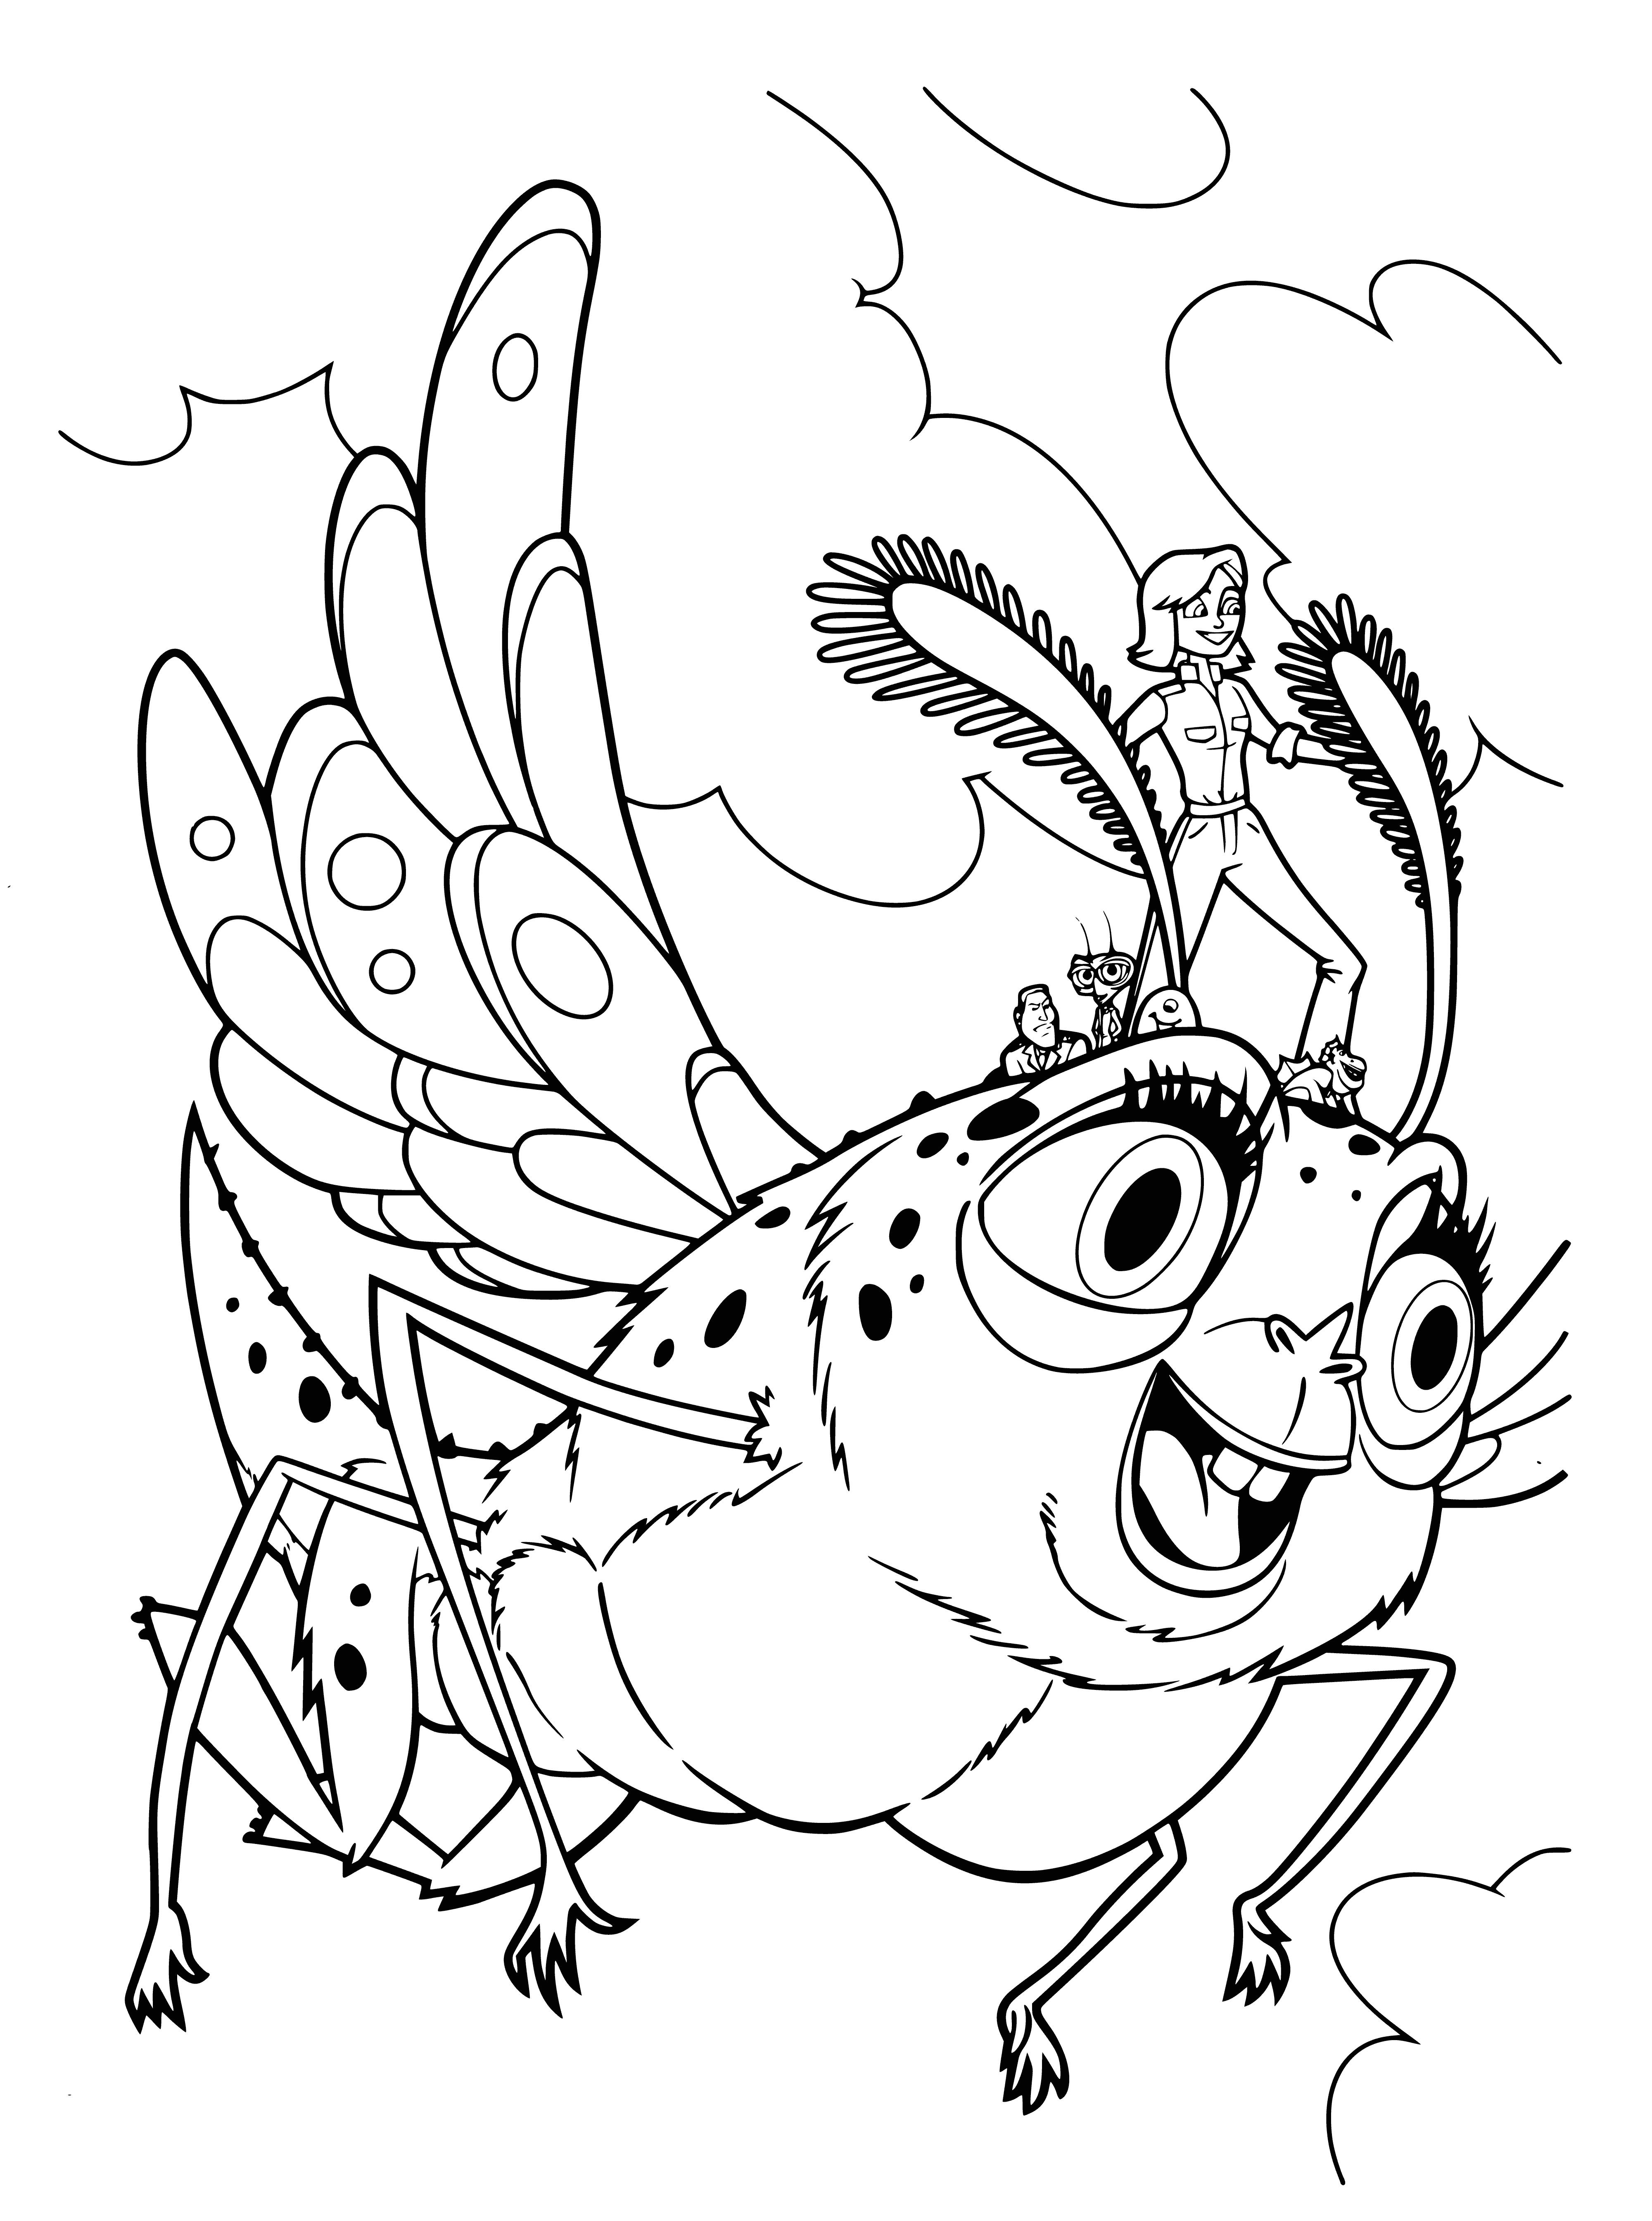 Insectosaurus coloring page